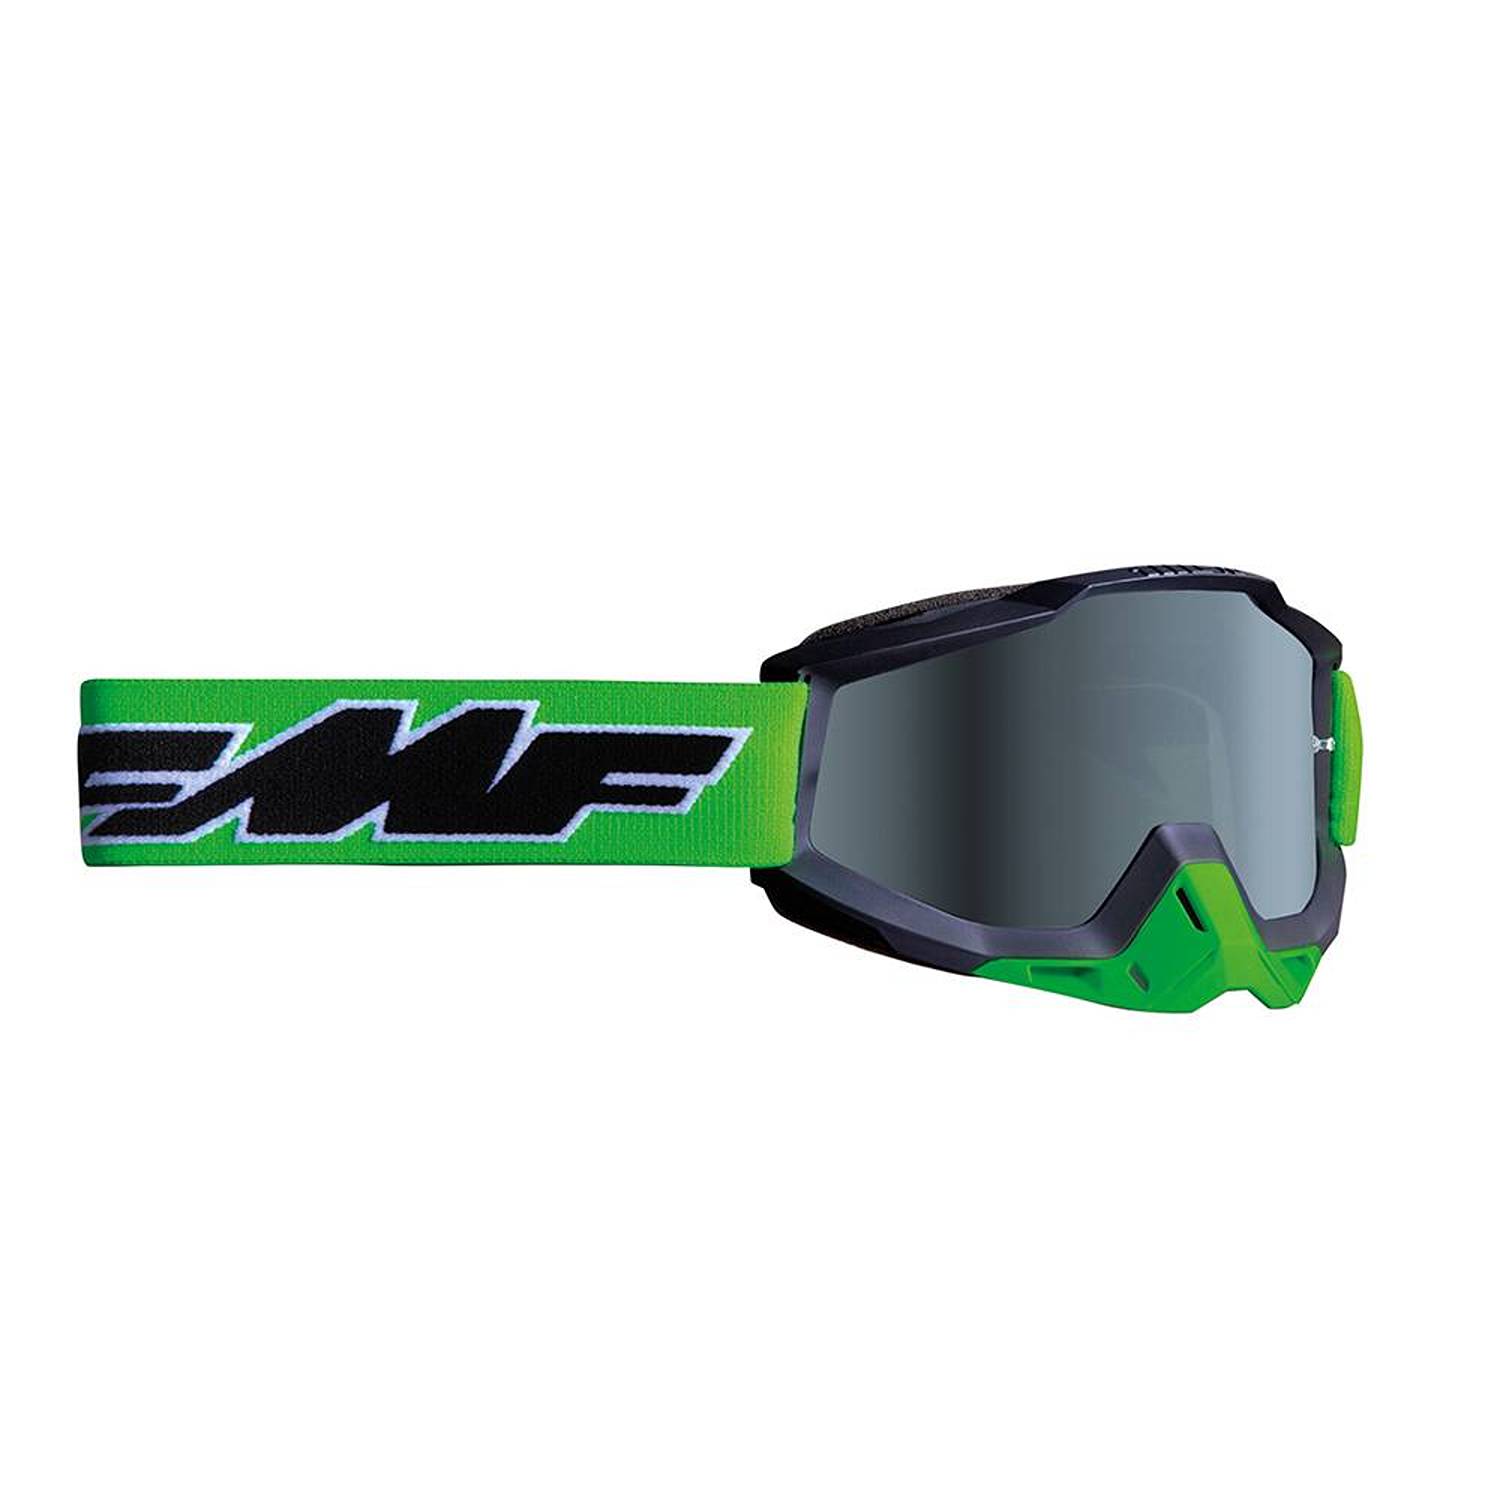 FMF Powerbomb Rocket Lime Mirror Green Goggles Size